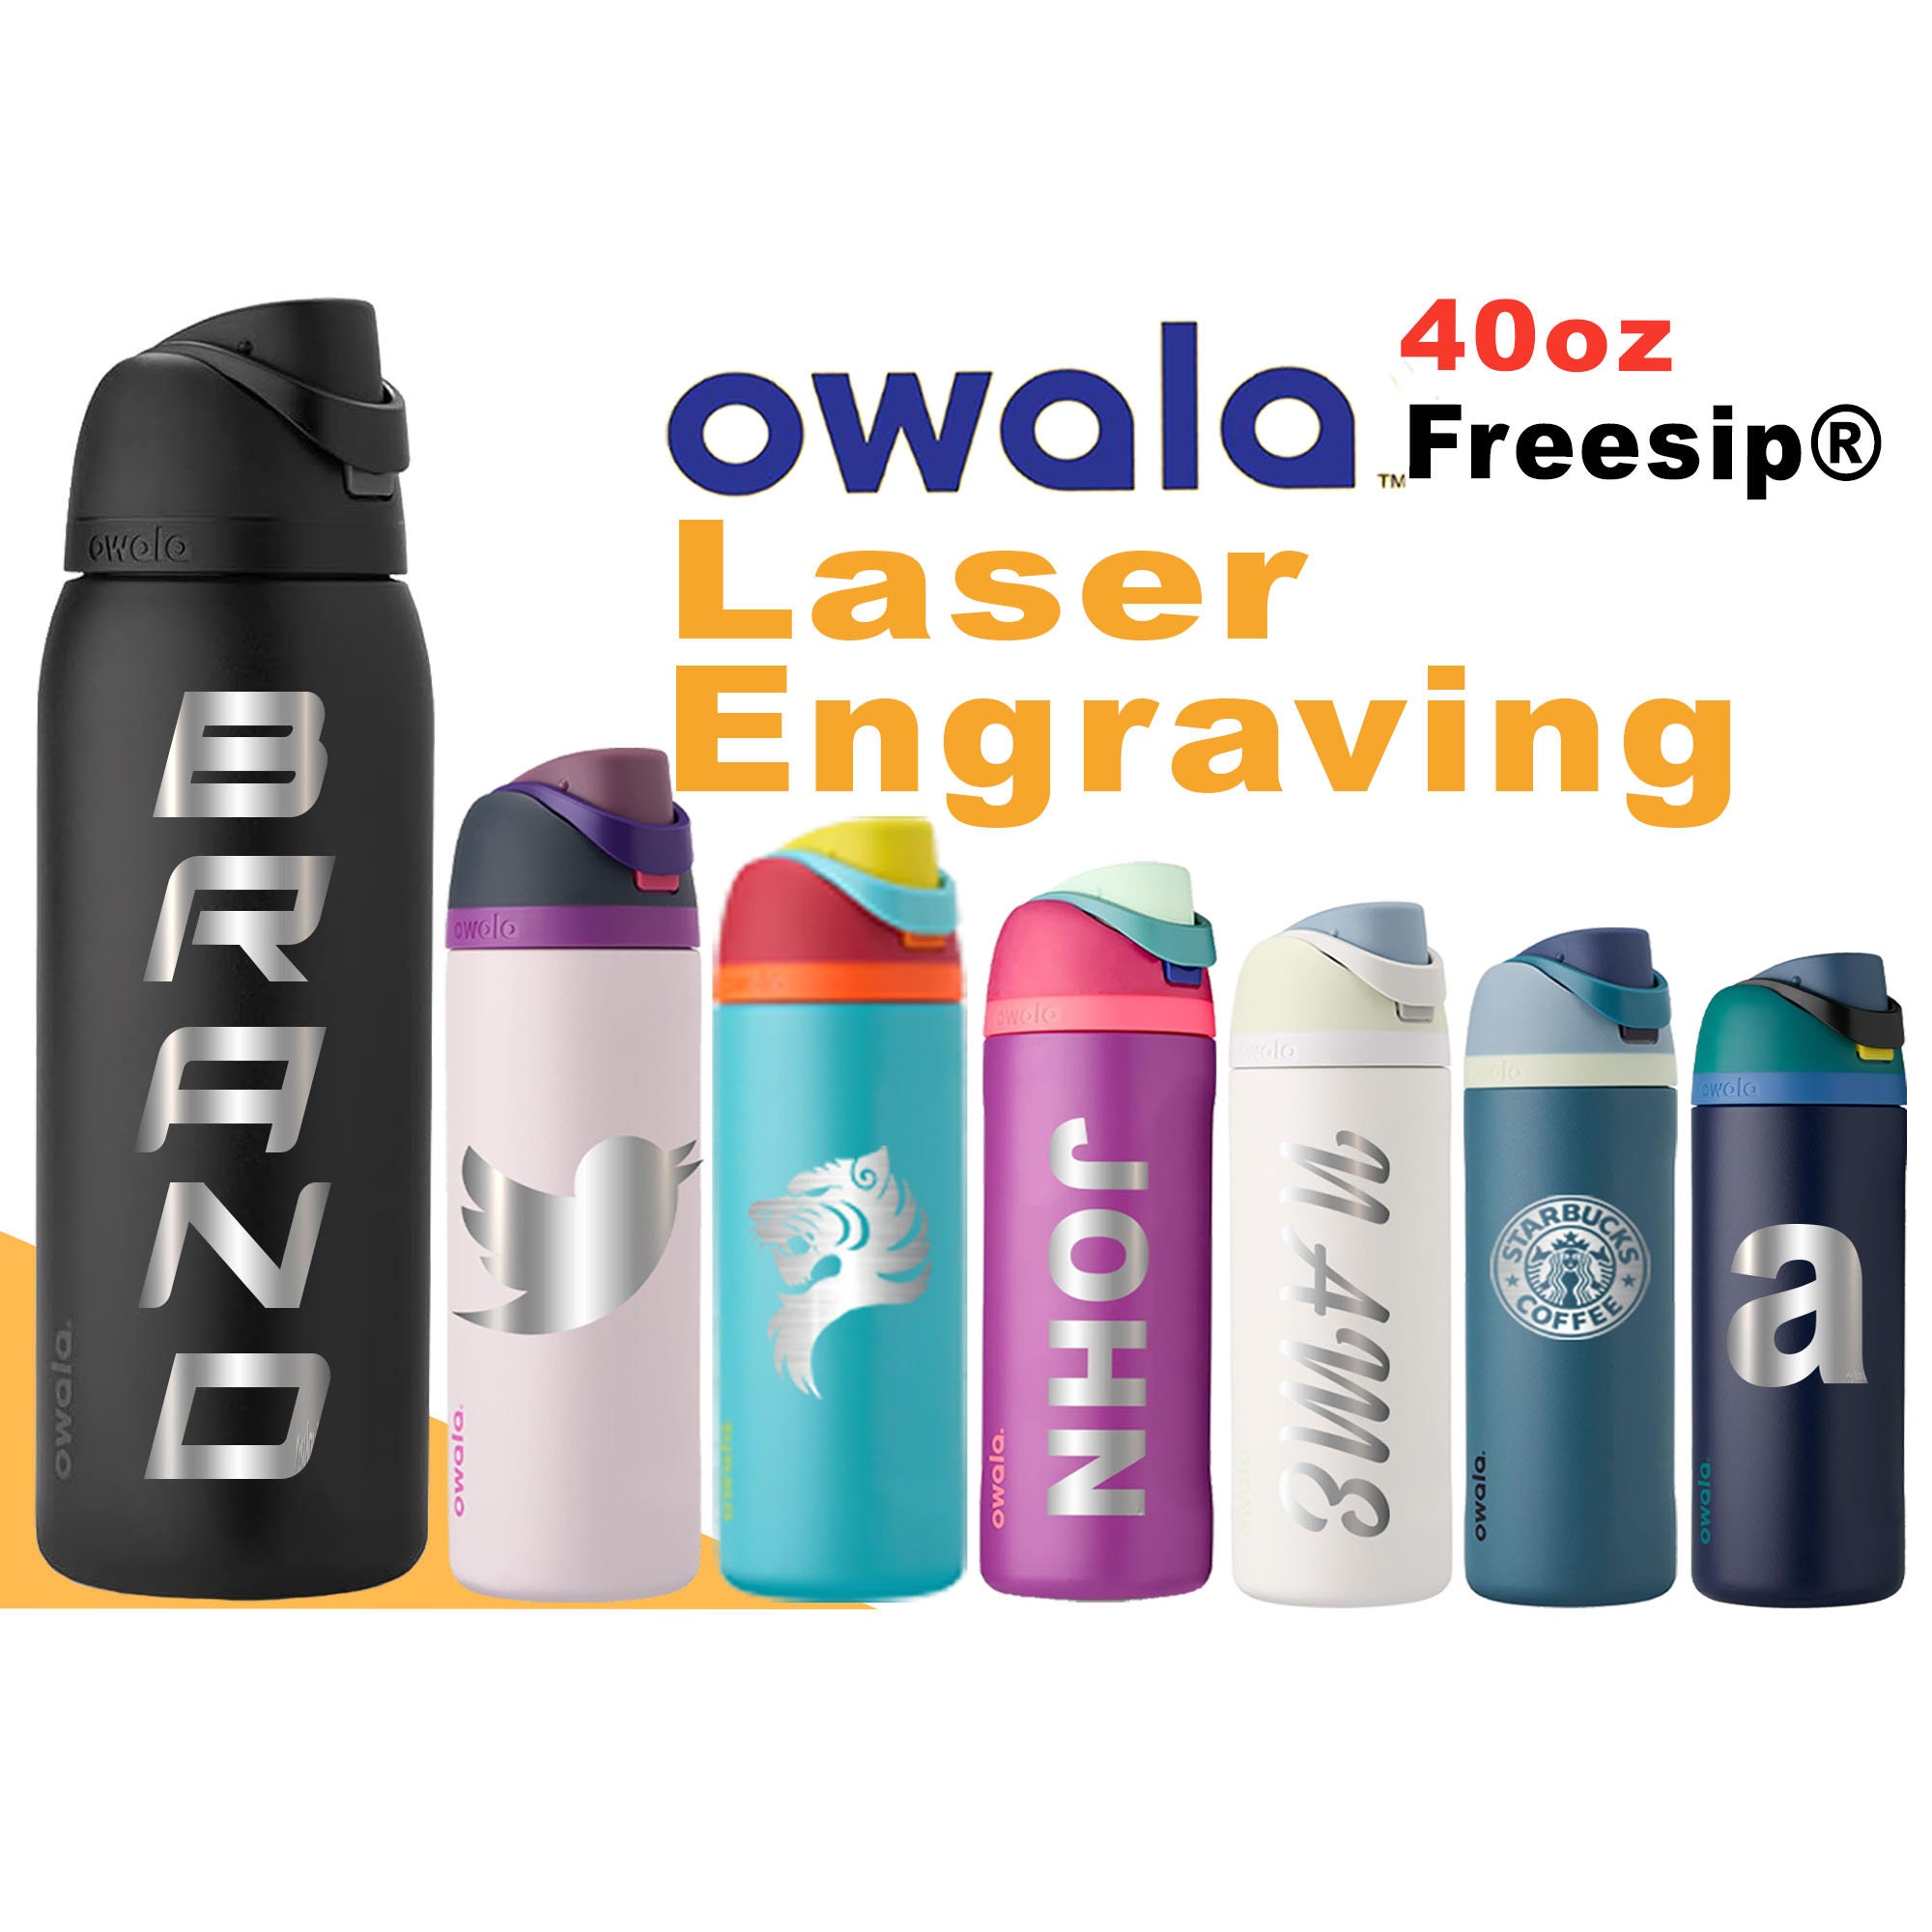 Owala Freesip 40oz - Can You See Me? owala Discover inspiration in